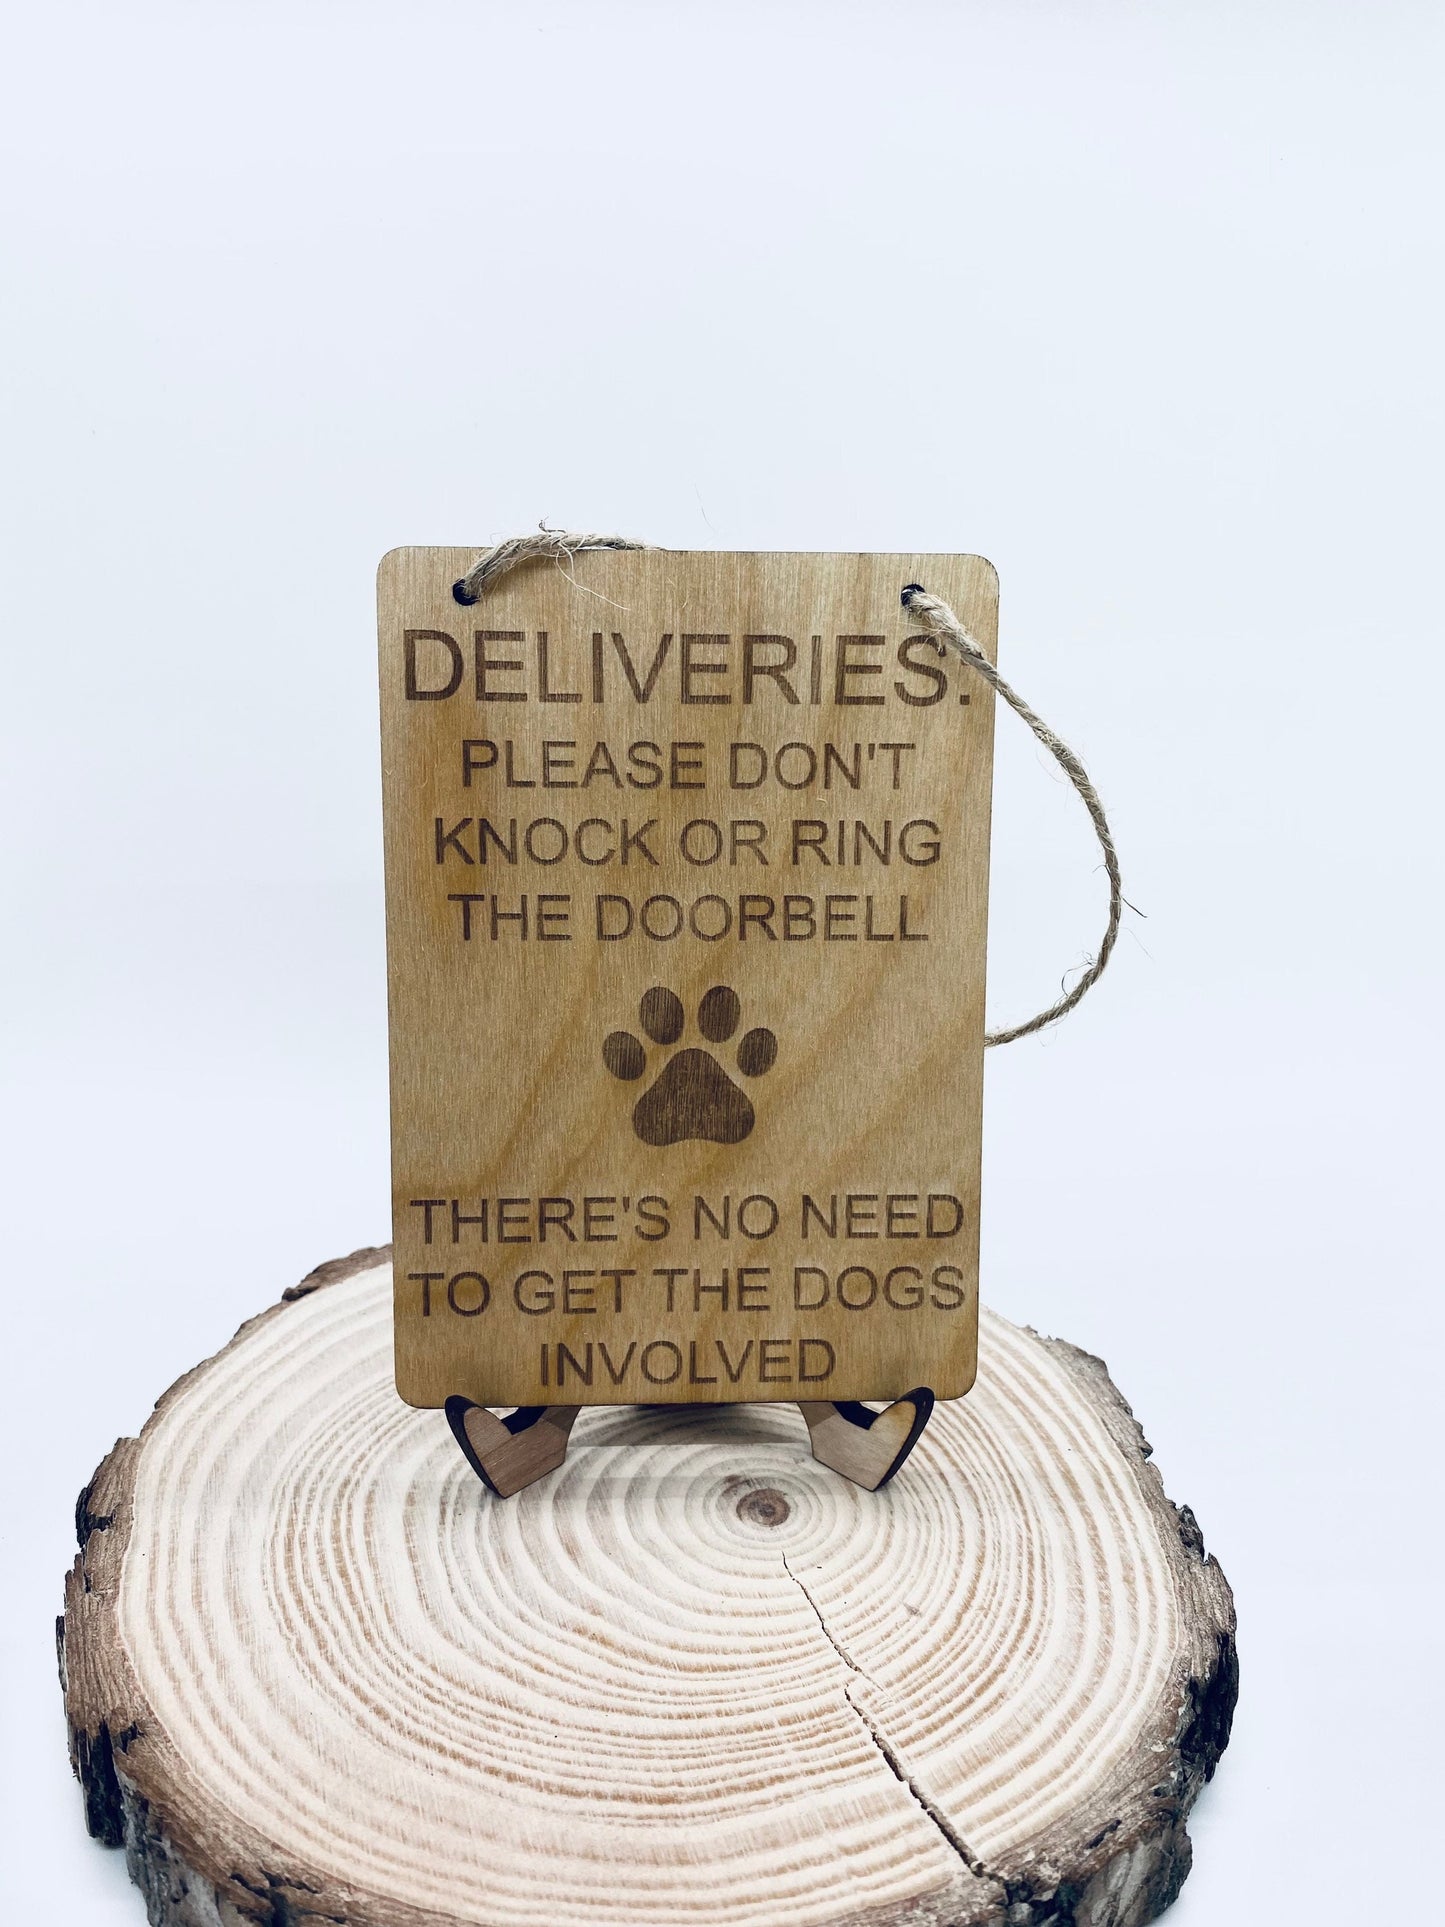 Dog Doorbell Sign, Delivery Doorbell Sign, No Need To Knock Or Ring Doorbell